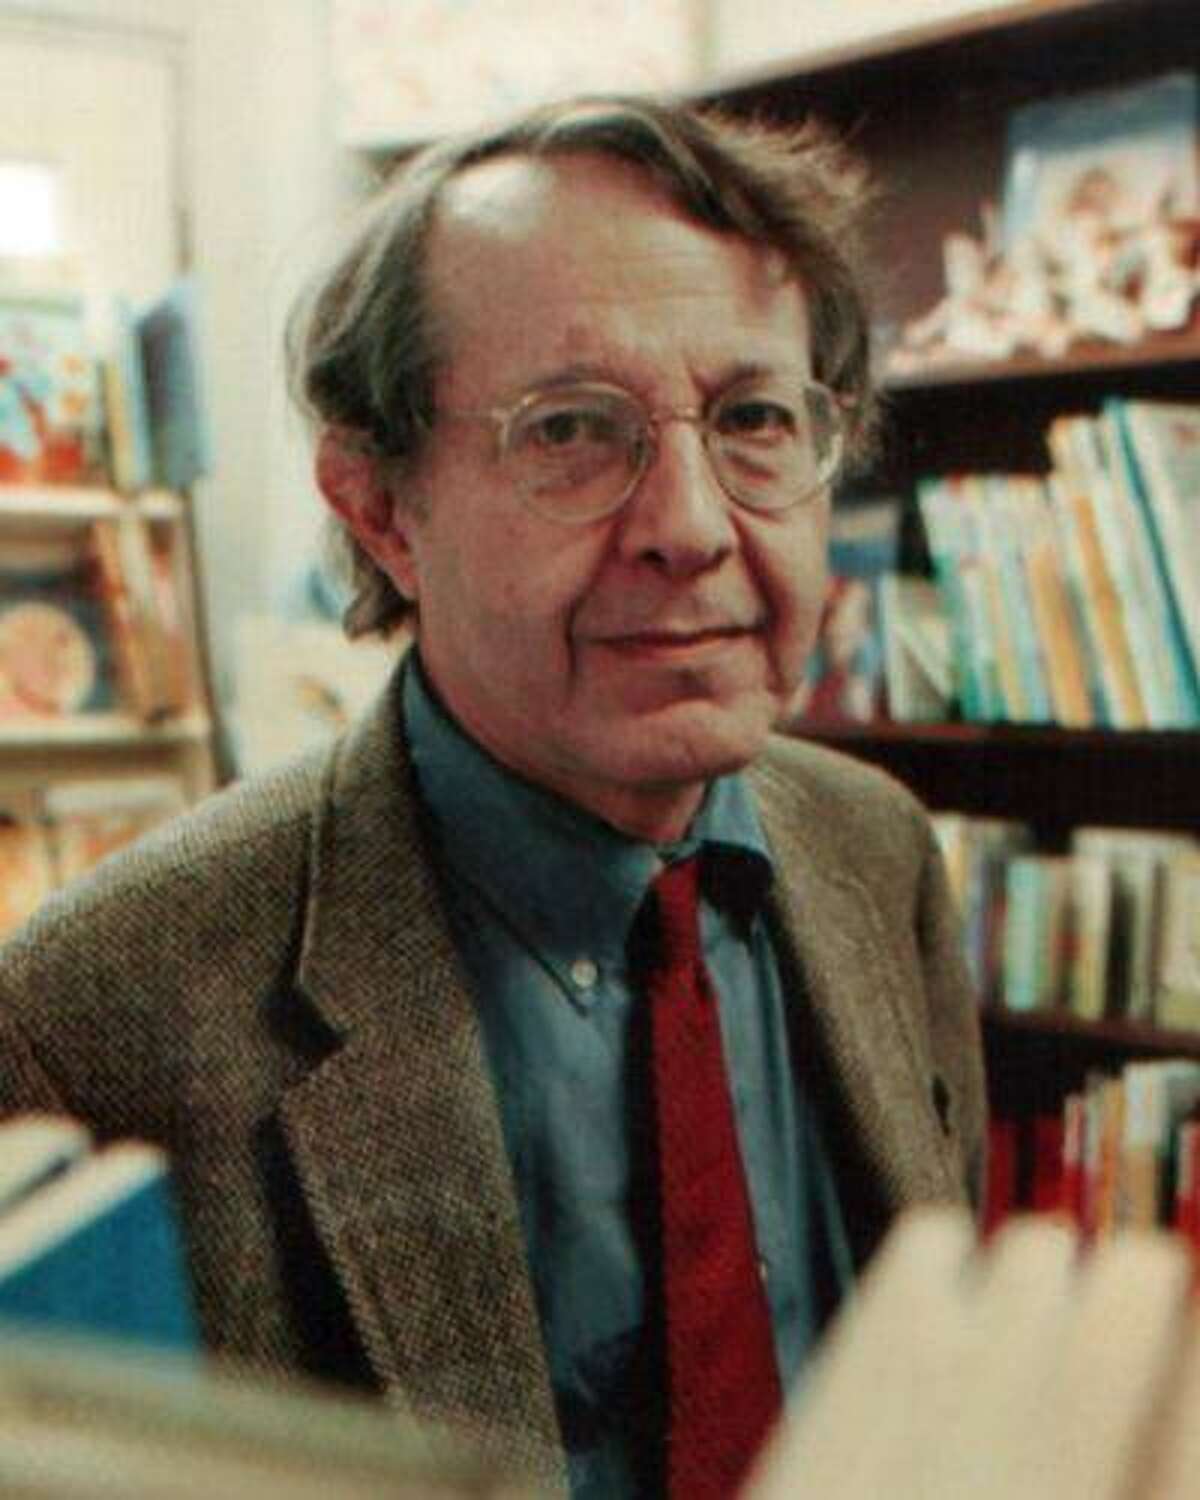 Author Jonathan Kozol has written many books about education inequality in the United States.